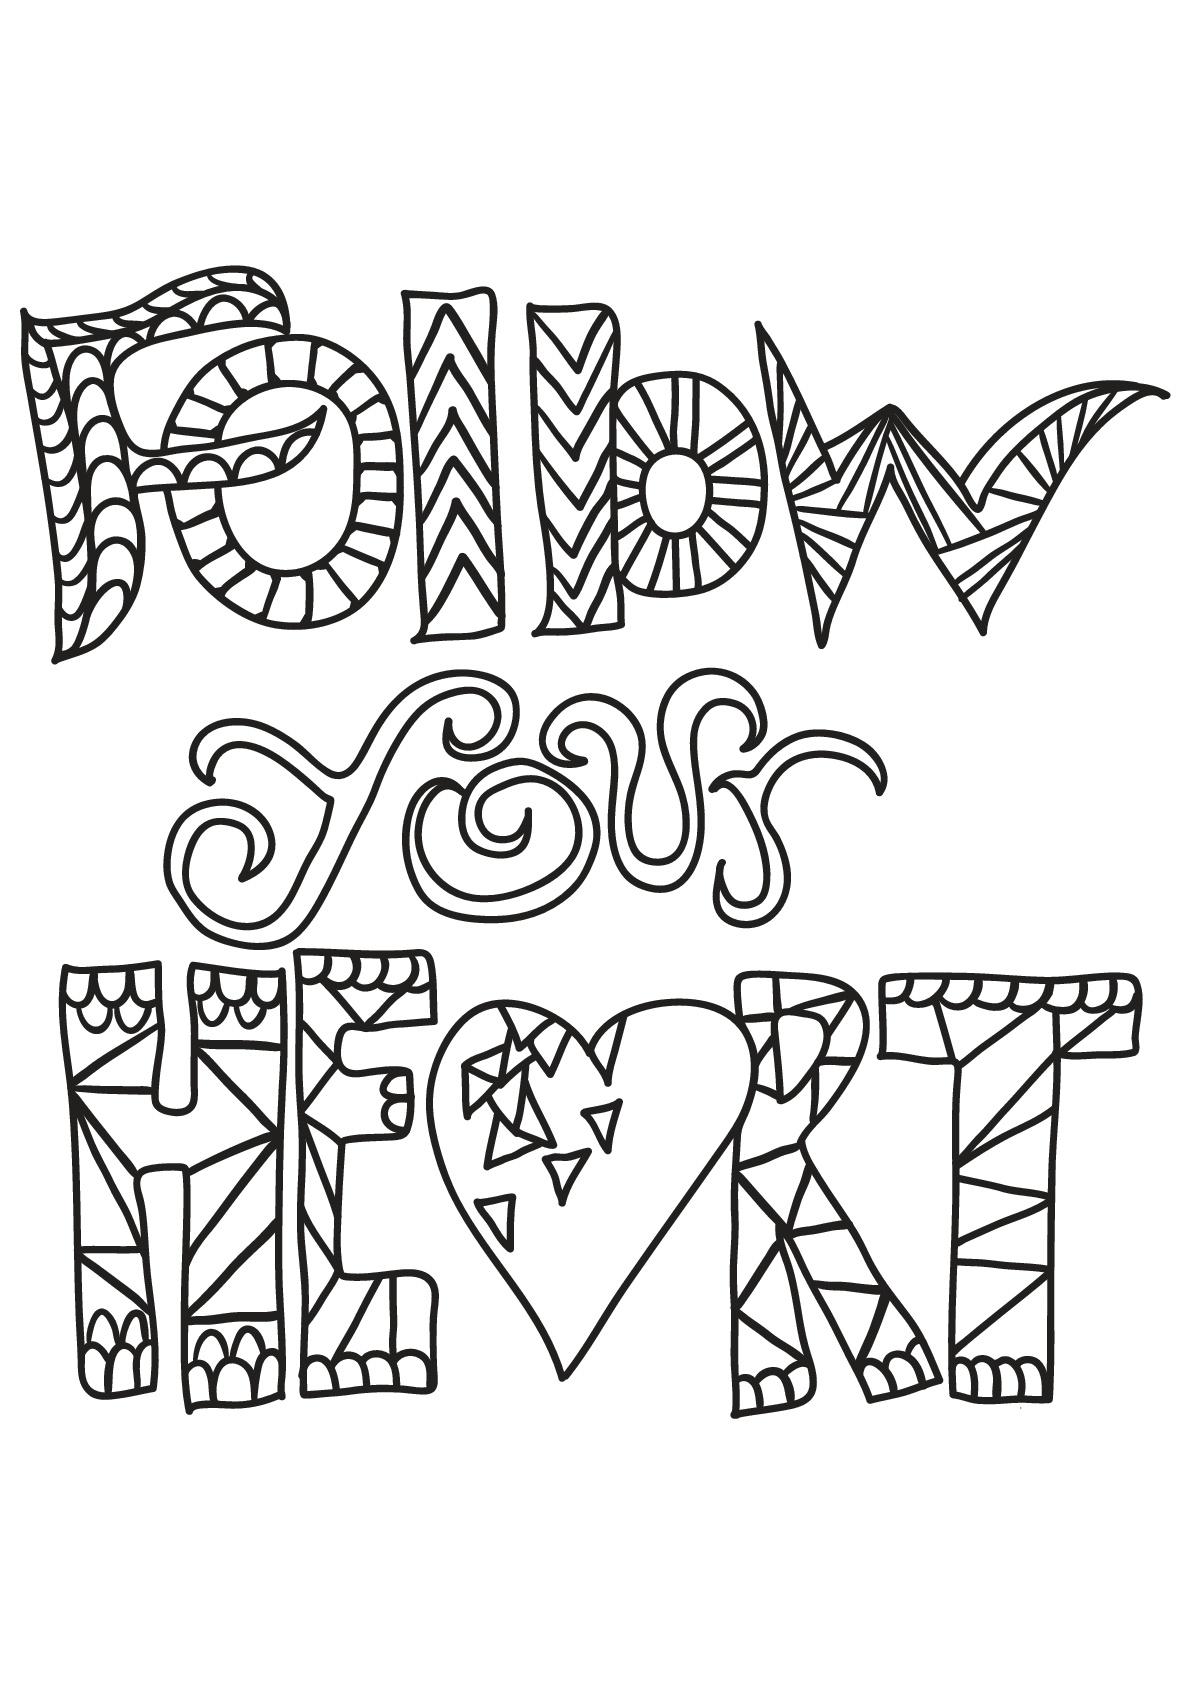 Free book quote - 6 - Positive & inspiring quotes Adult Coloring Pages